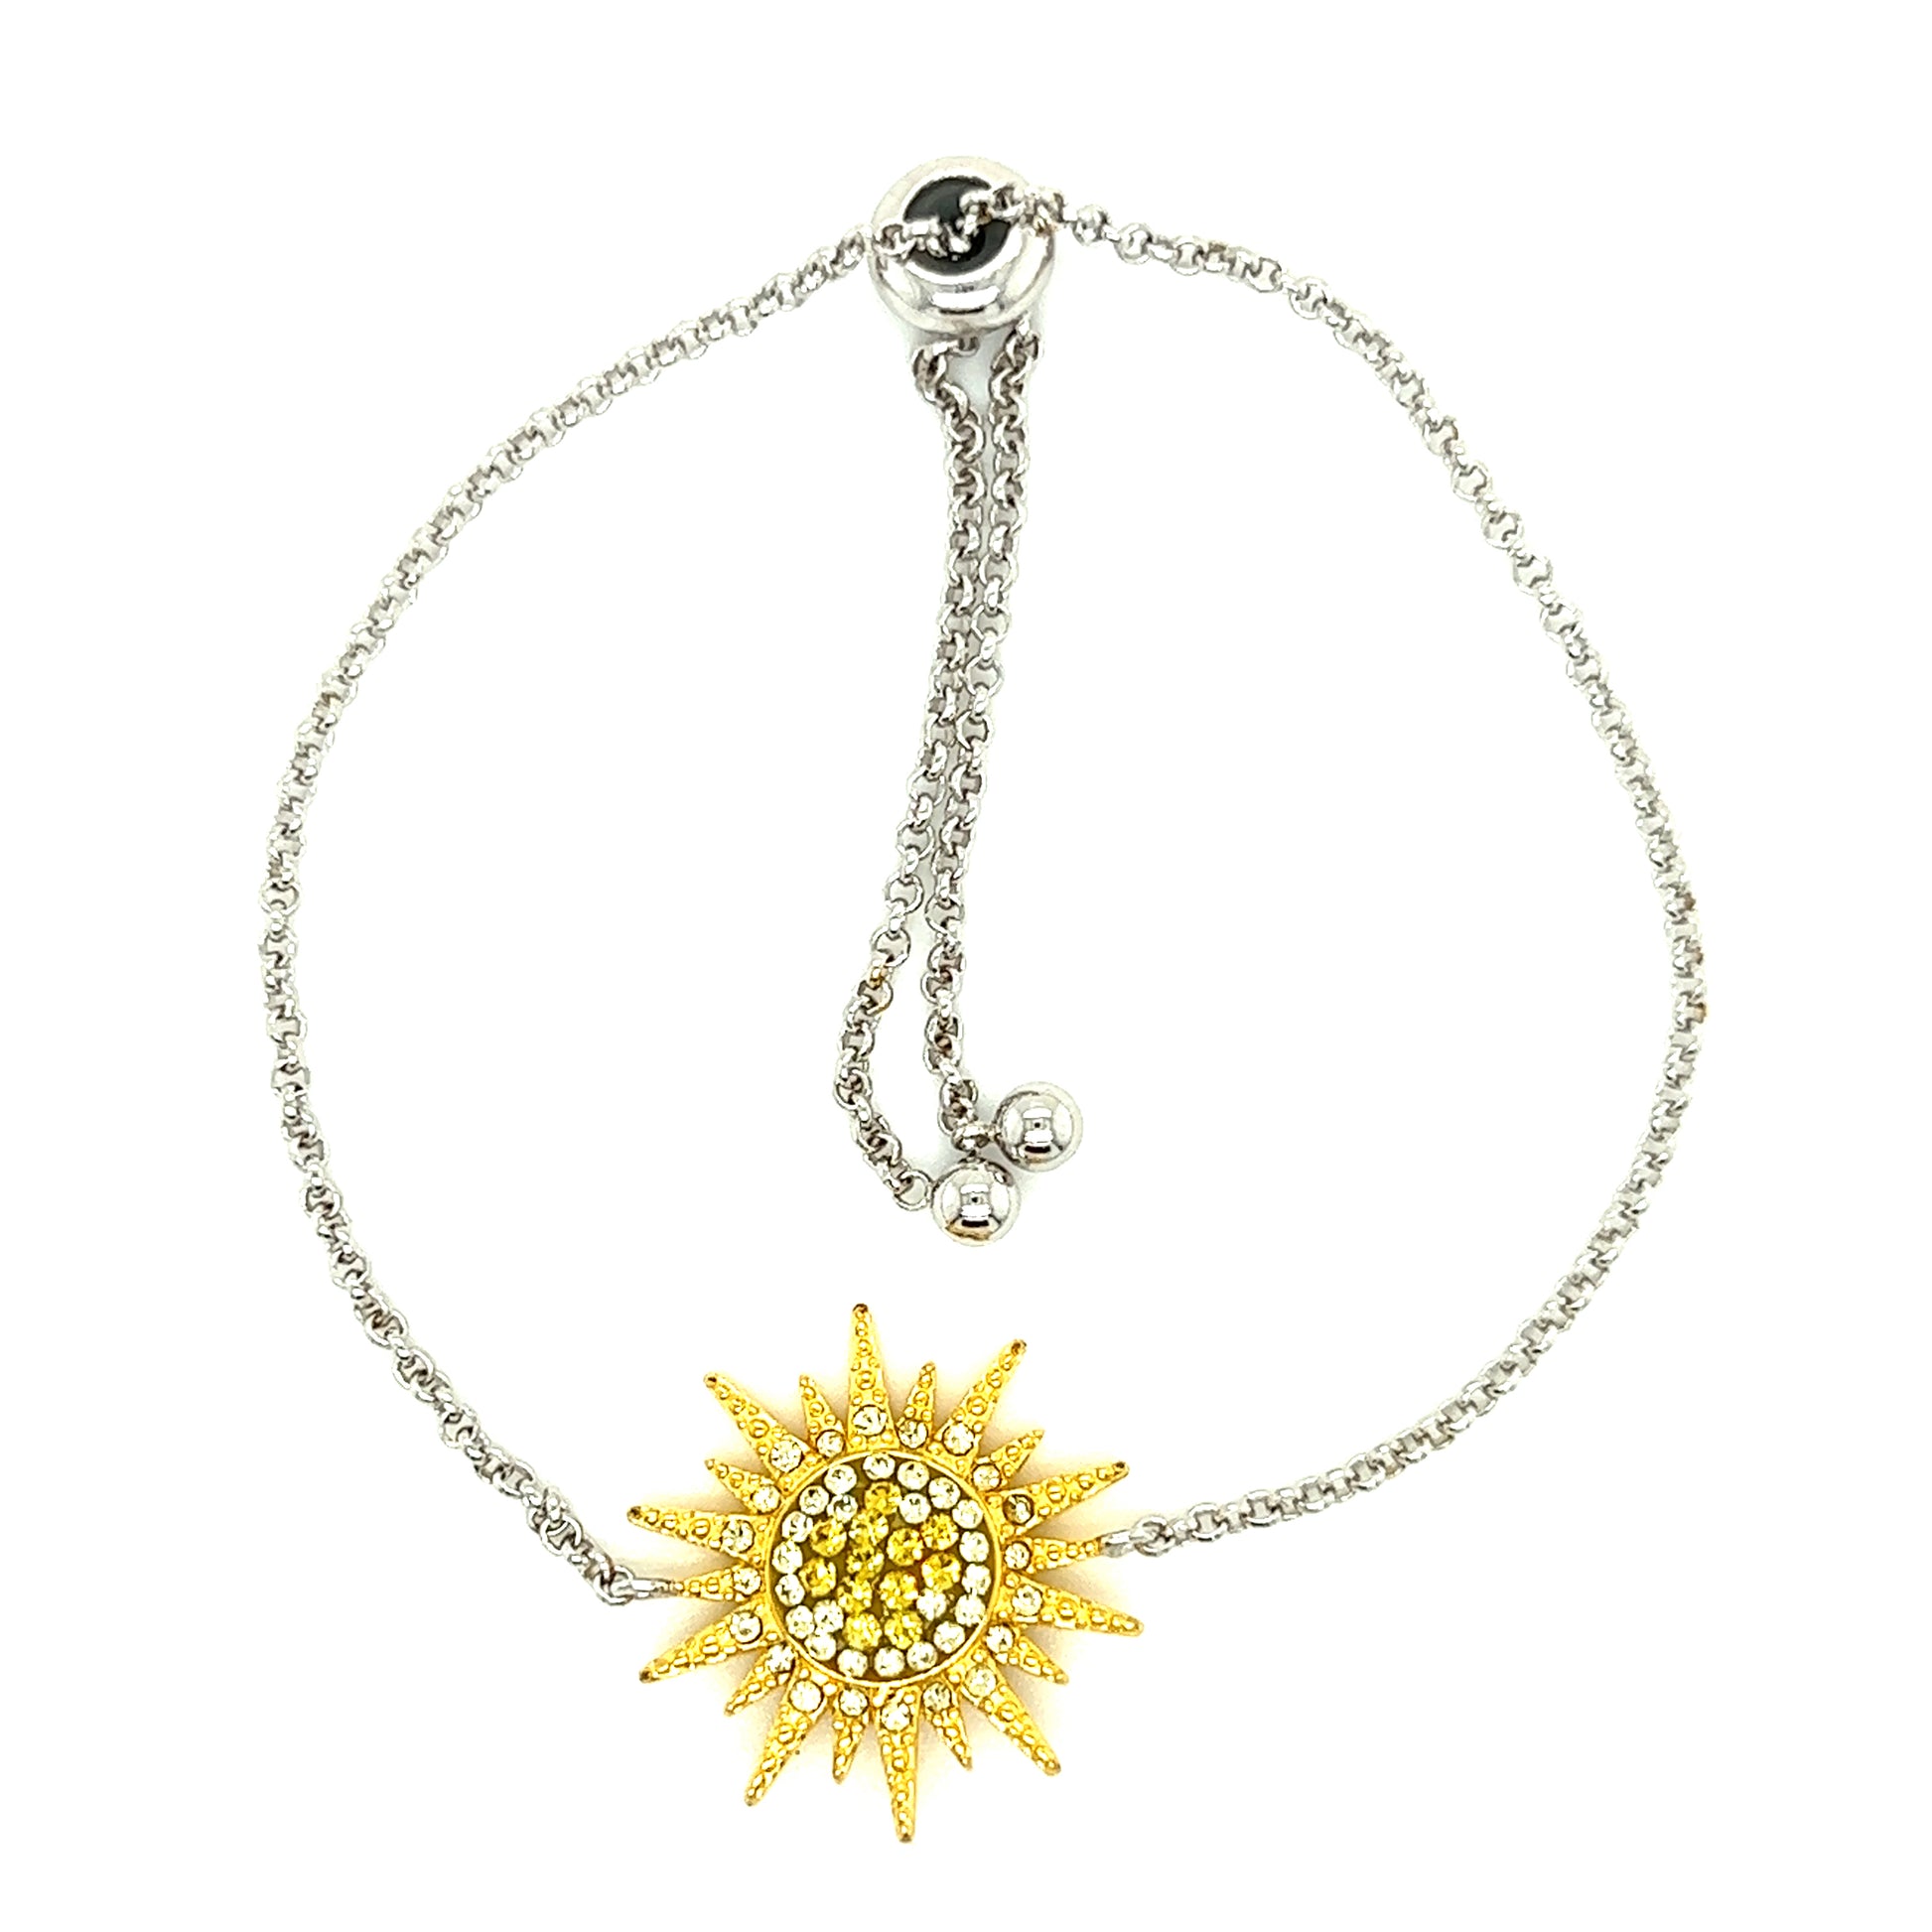 Sunburst Bracelet with Yellow and White Crystals in Sterling Silver Top View